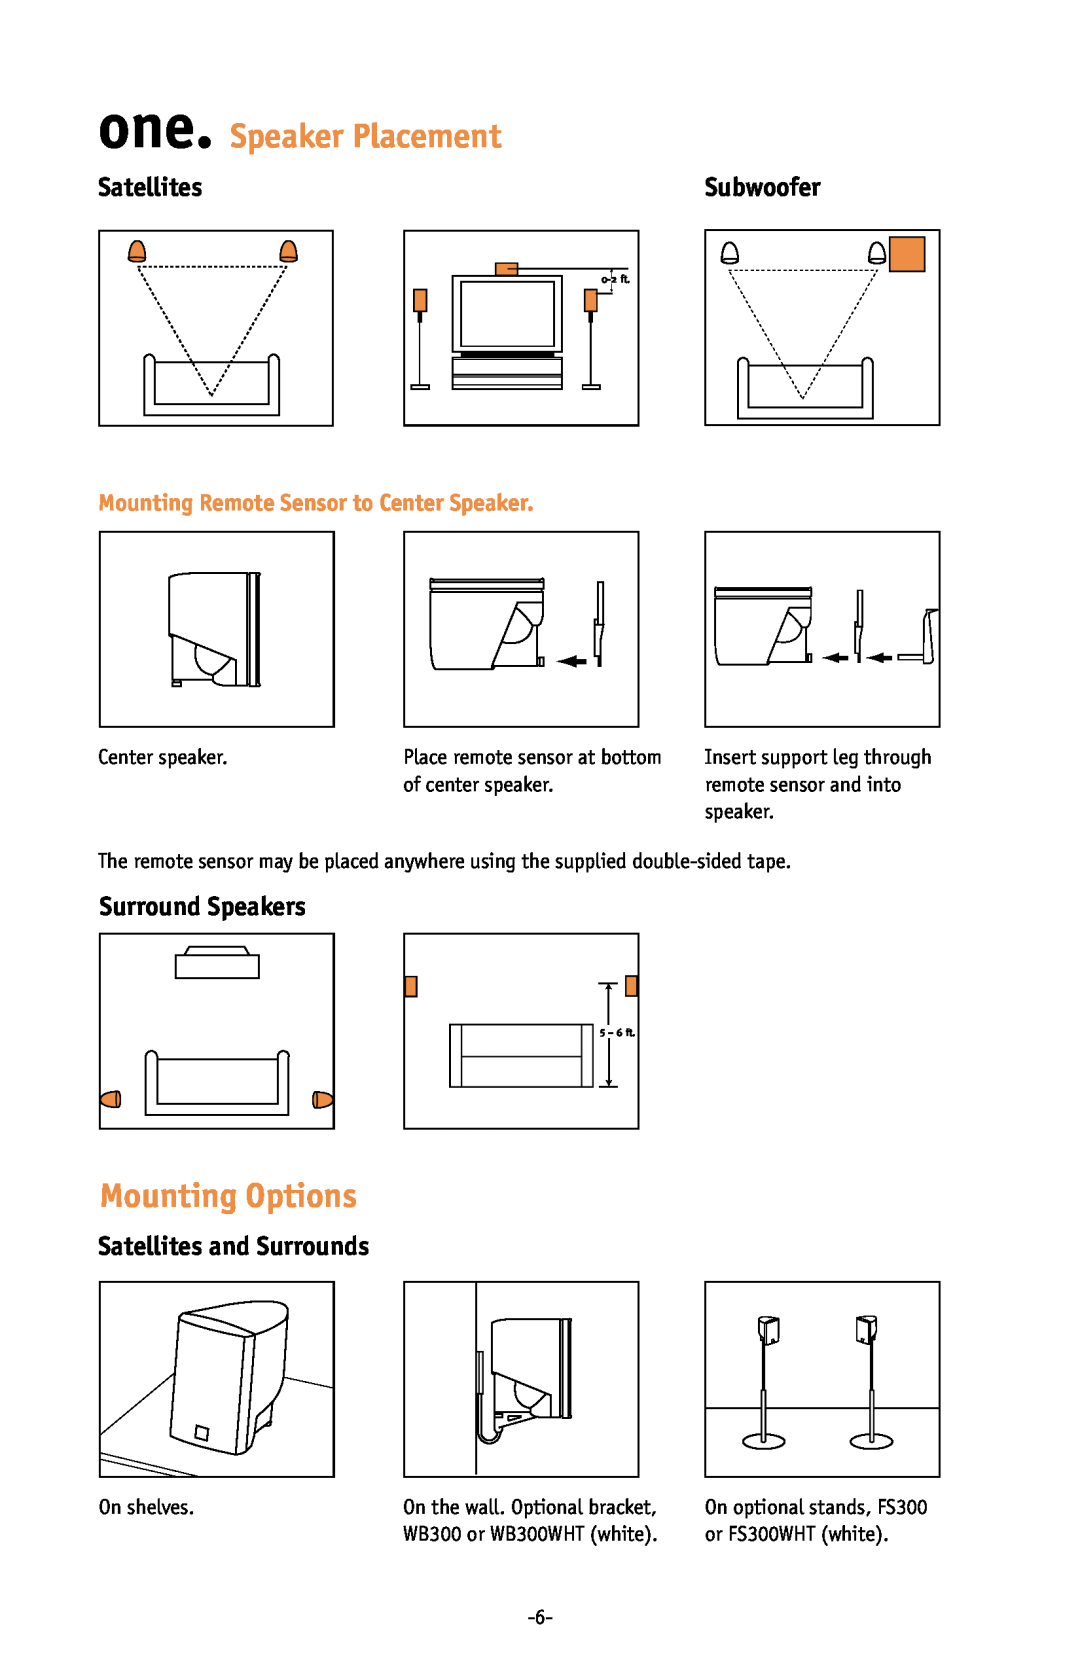 JBL ESC333 setup guide one. Speaker Placement, Mounting Options, Surround Speakers, Satellites and Surrounds 